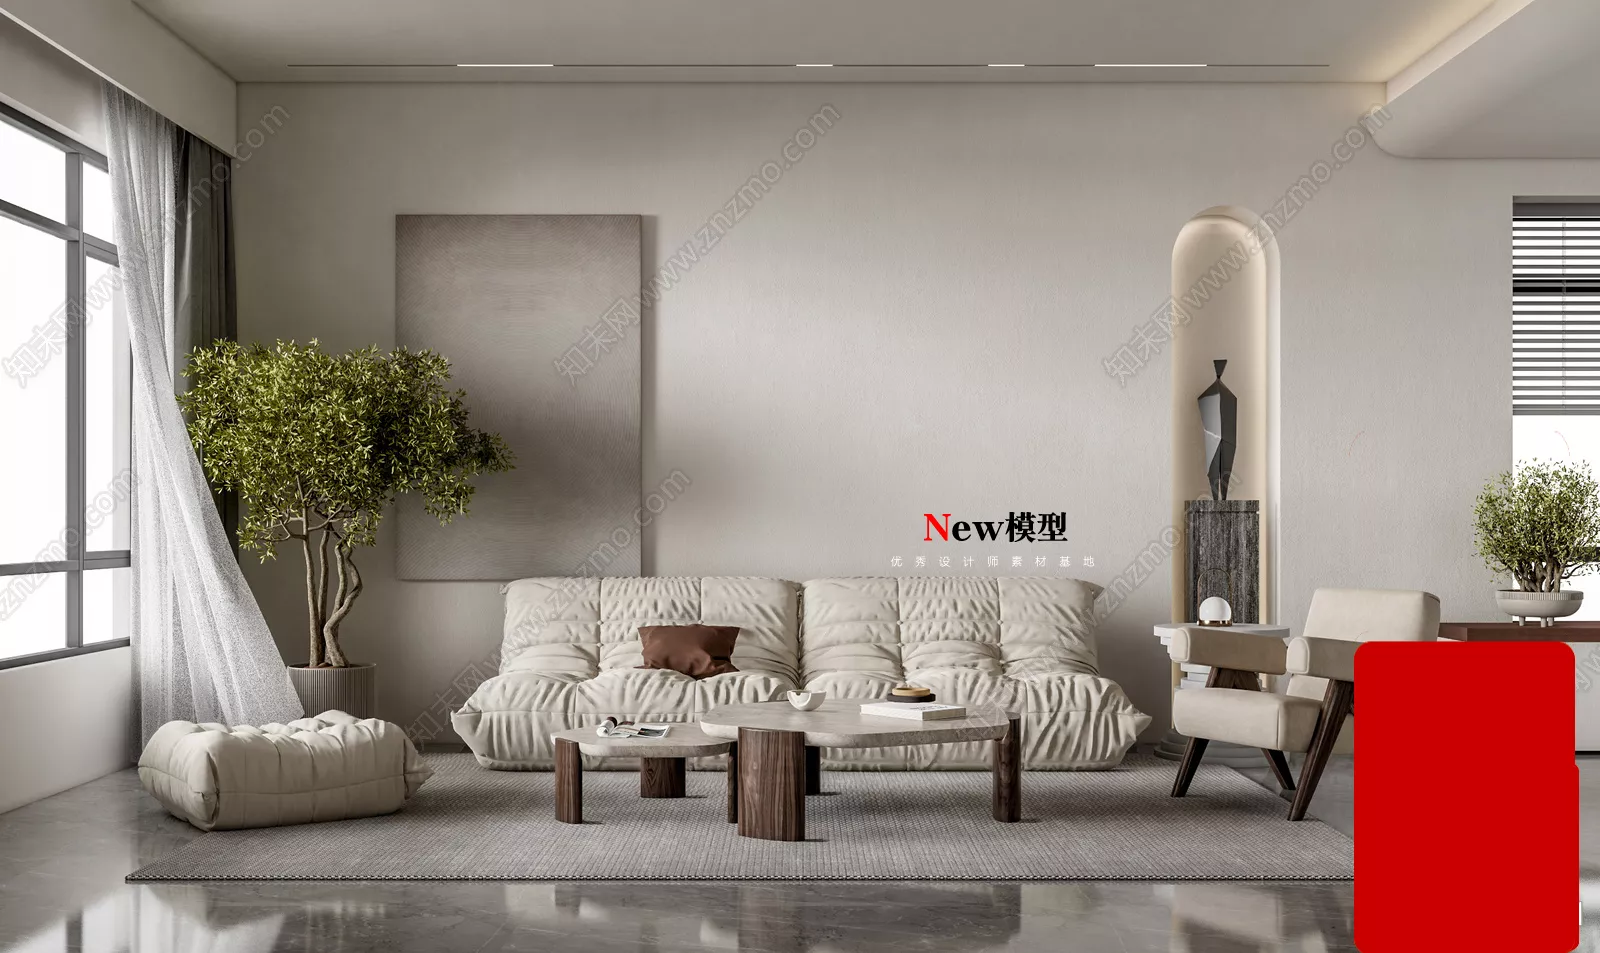 WABI SABI INTERIOR COLLECTION - SKETCHUP 3D SCENE - VRAY OR ENSCAPE - ID17734